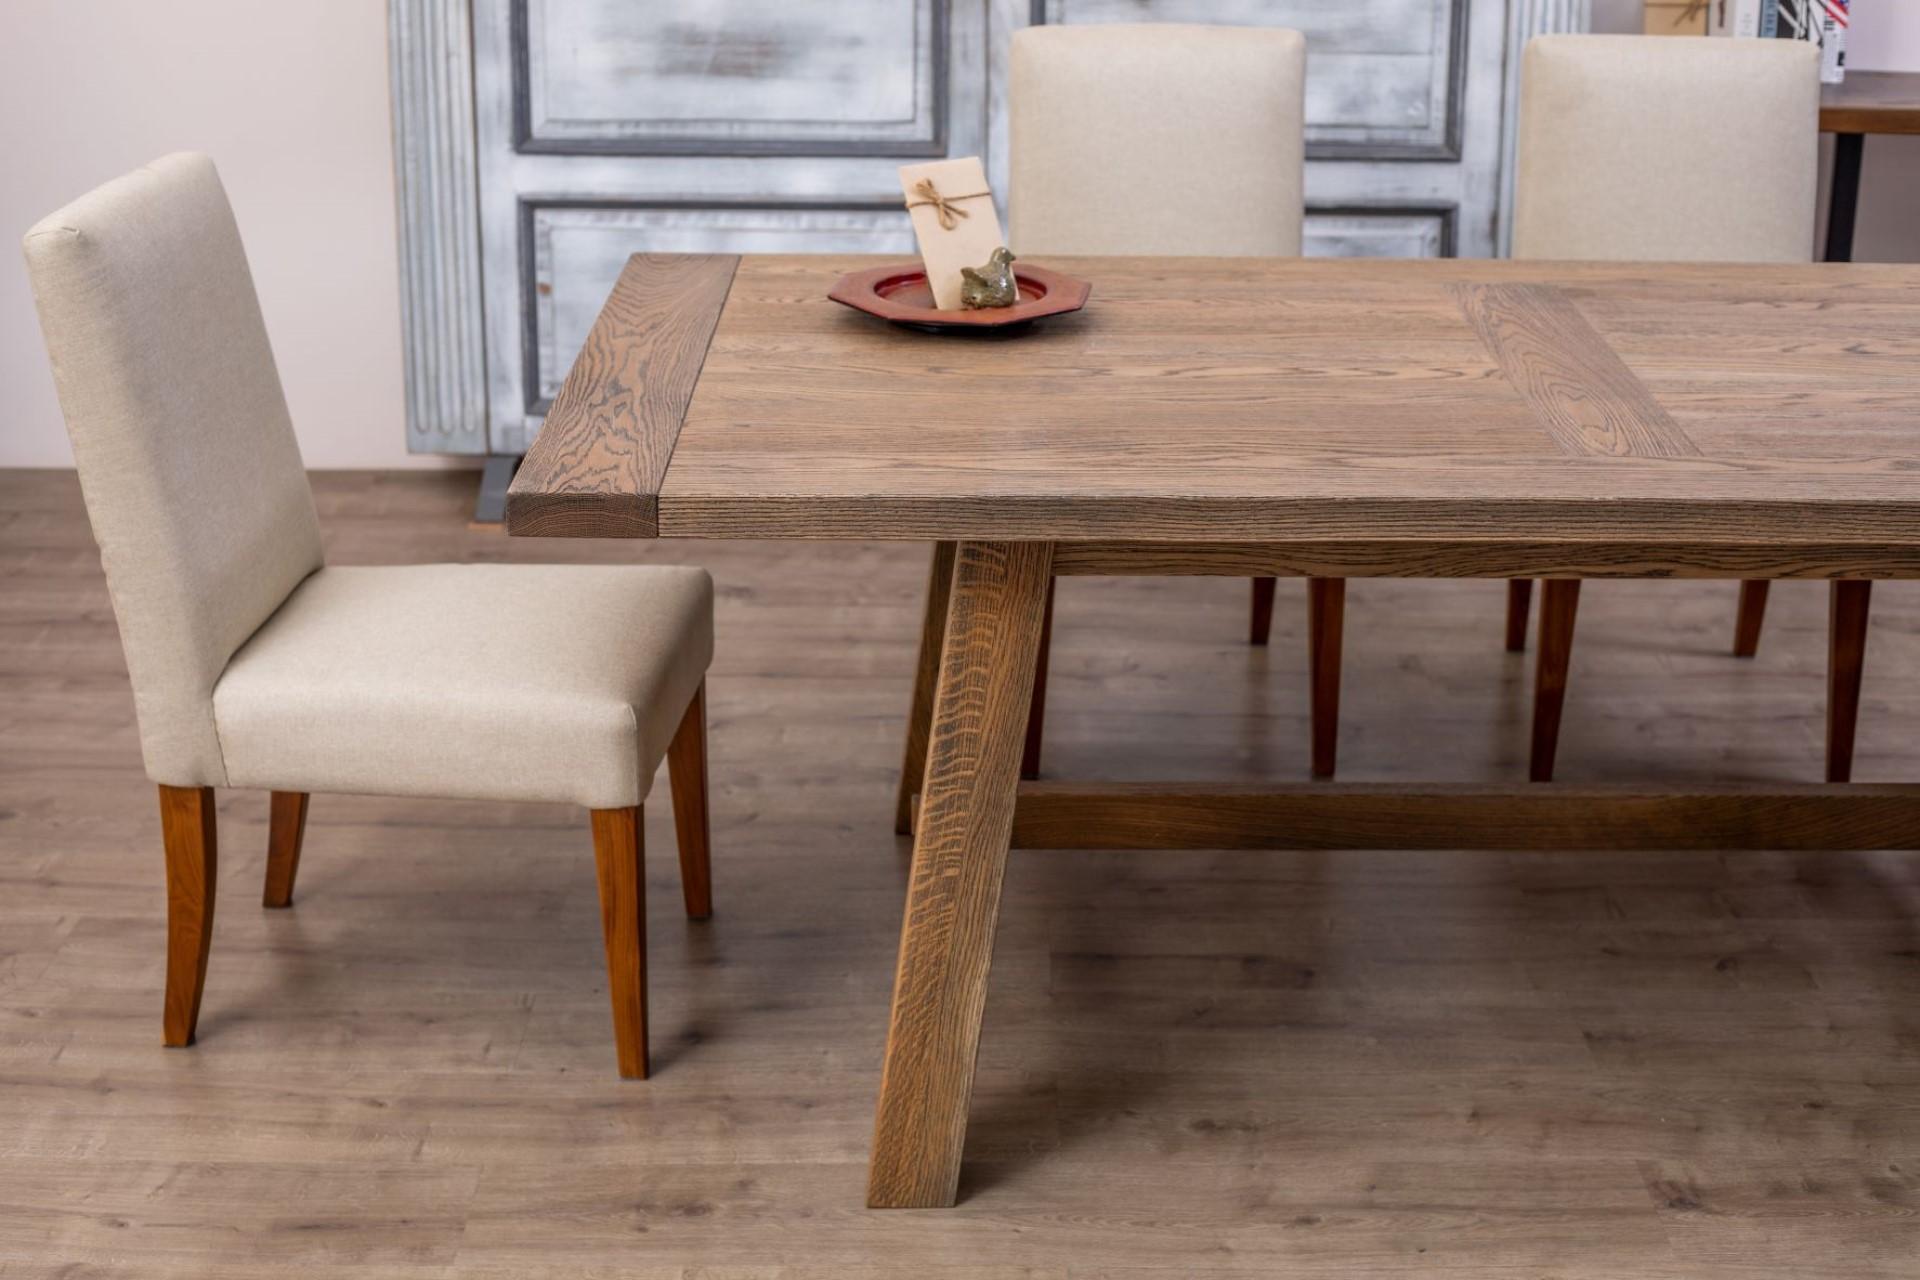 The subtle angles of this solid oak table provide a refined rustic elegance that makes it a genuinely approachable design. The sloped legs and solid natural wood highlight the hand-crafted mortise and tenon joinery and an intricate French Country